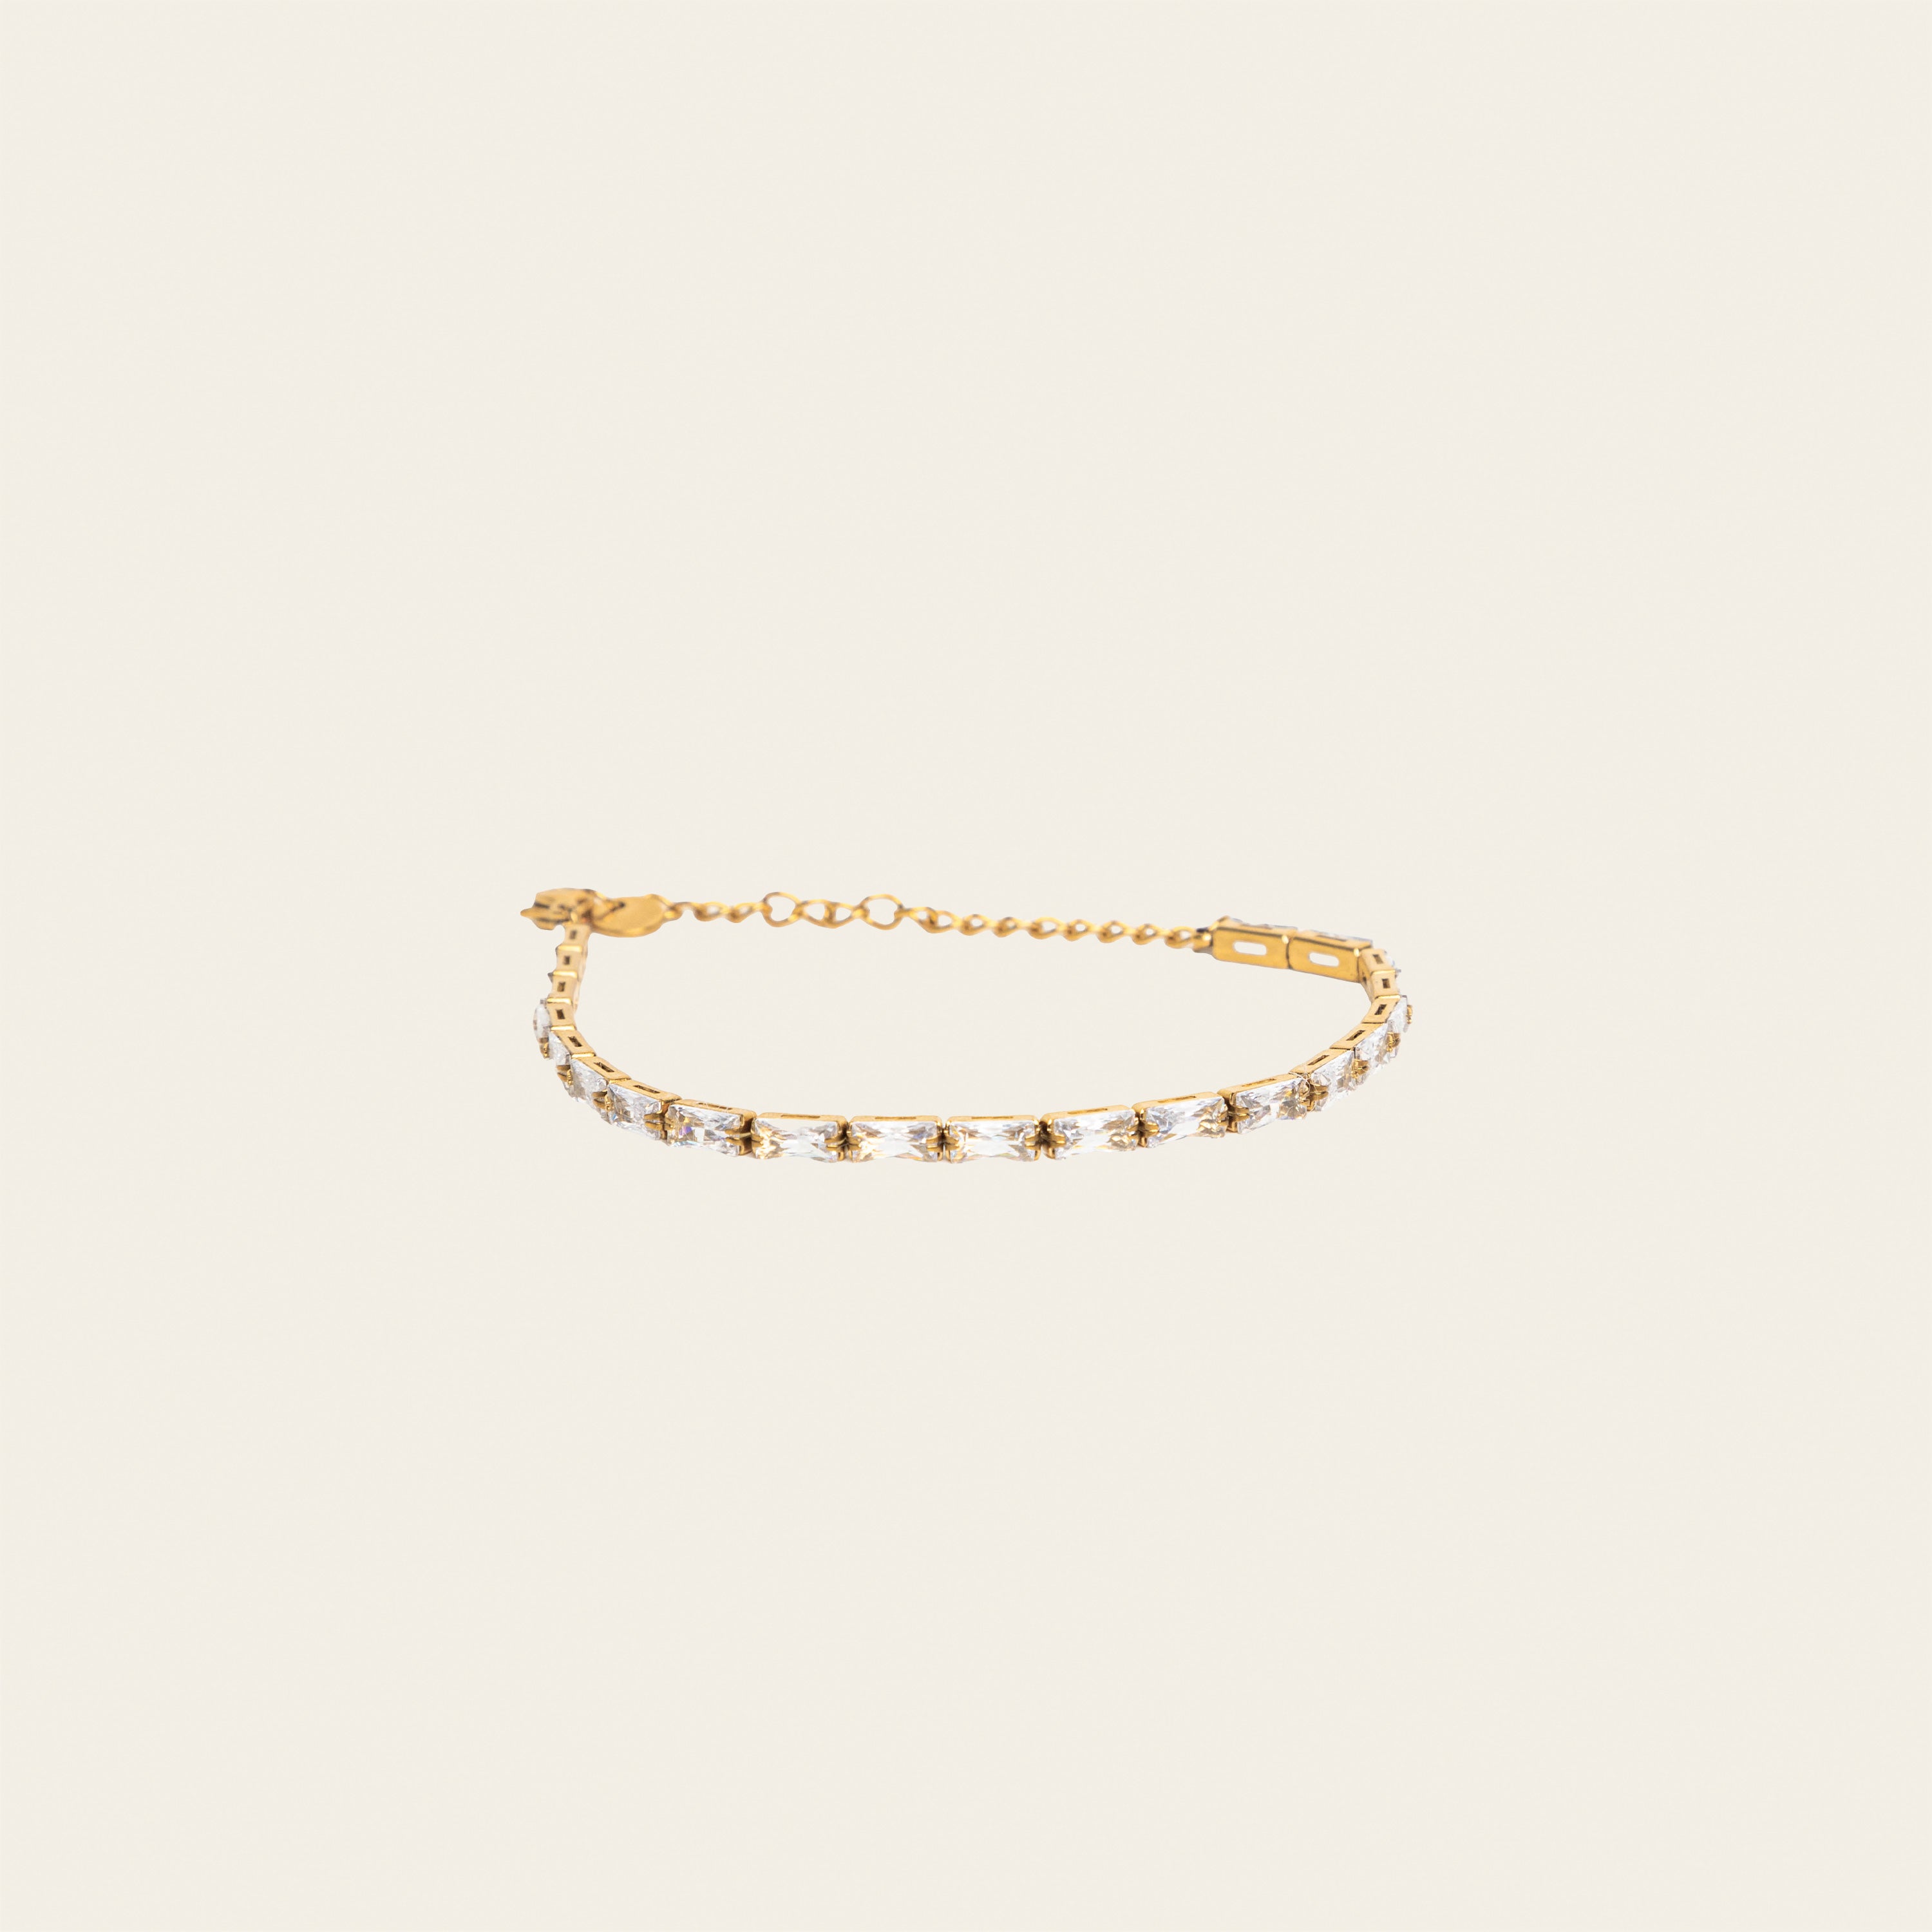 Image of the stunning Elizabeth Bracelet - a perfect blend of fashion and function. With adjustable sizing and 18K gold plated stainless steel, it's both versatile and durable. Enjoy its non-tarnish, water-resistant, and allergy-free properties. Elevate any look with this must-have accessory.